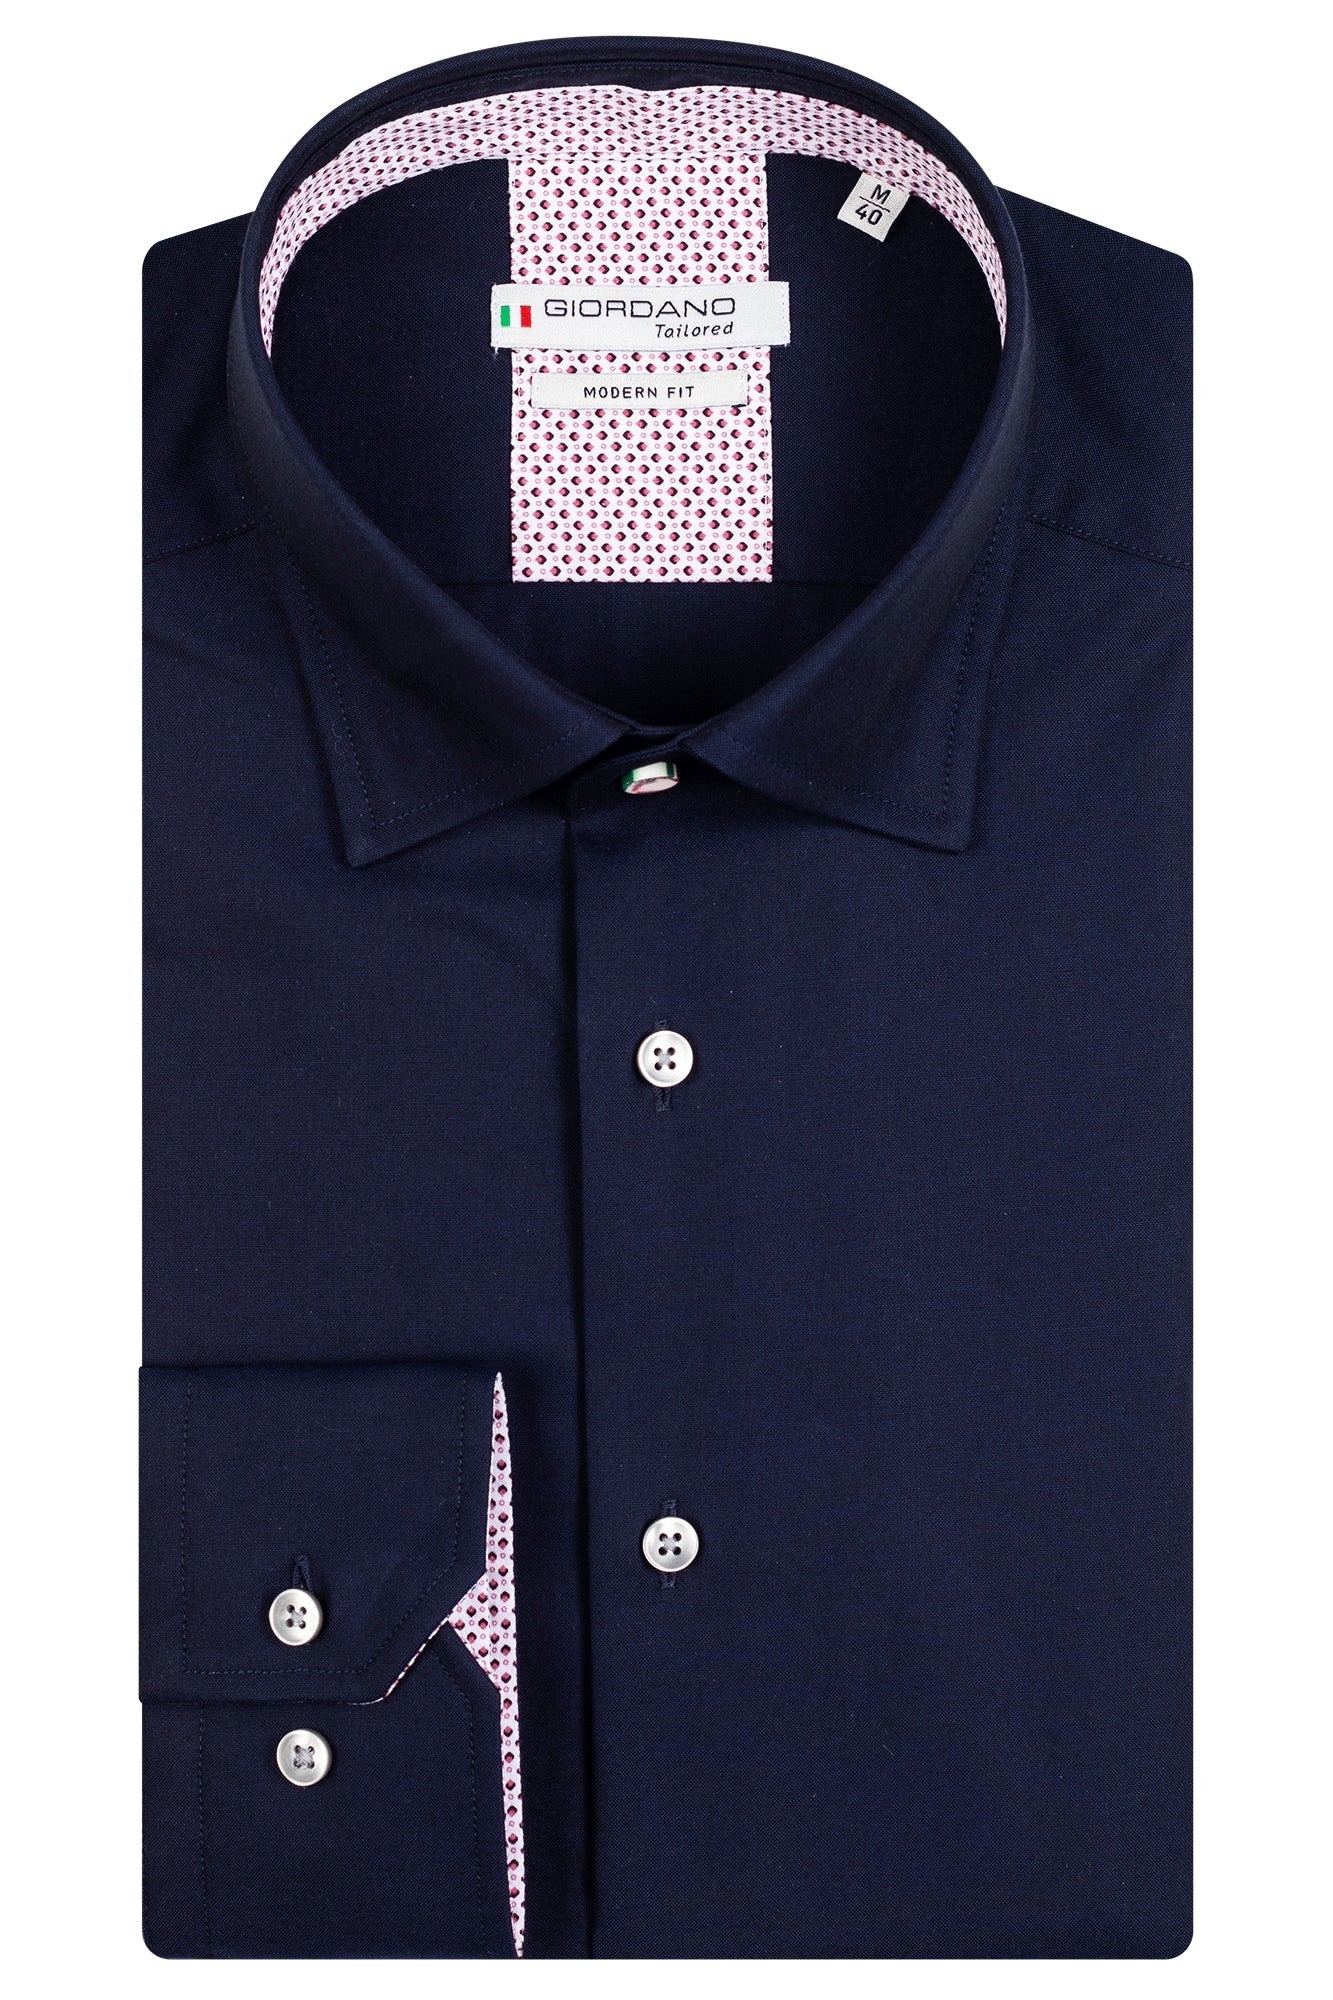 Giordano 100% cotton shirt.Navy shirt with soft pink and navy polka dot print on the lining of collar and cuff. Harringbone design. The perfect summer light shirt. Dressed casually not tucked in, or more formal tucked in. Great paired with jeans and chinos but also shorts.